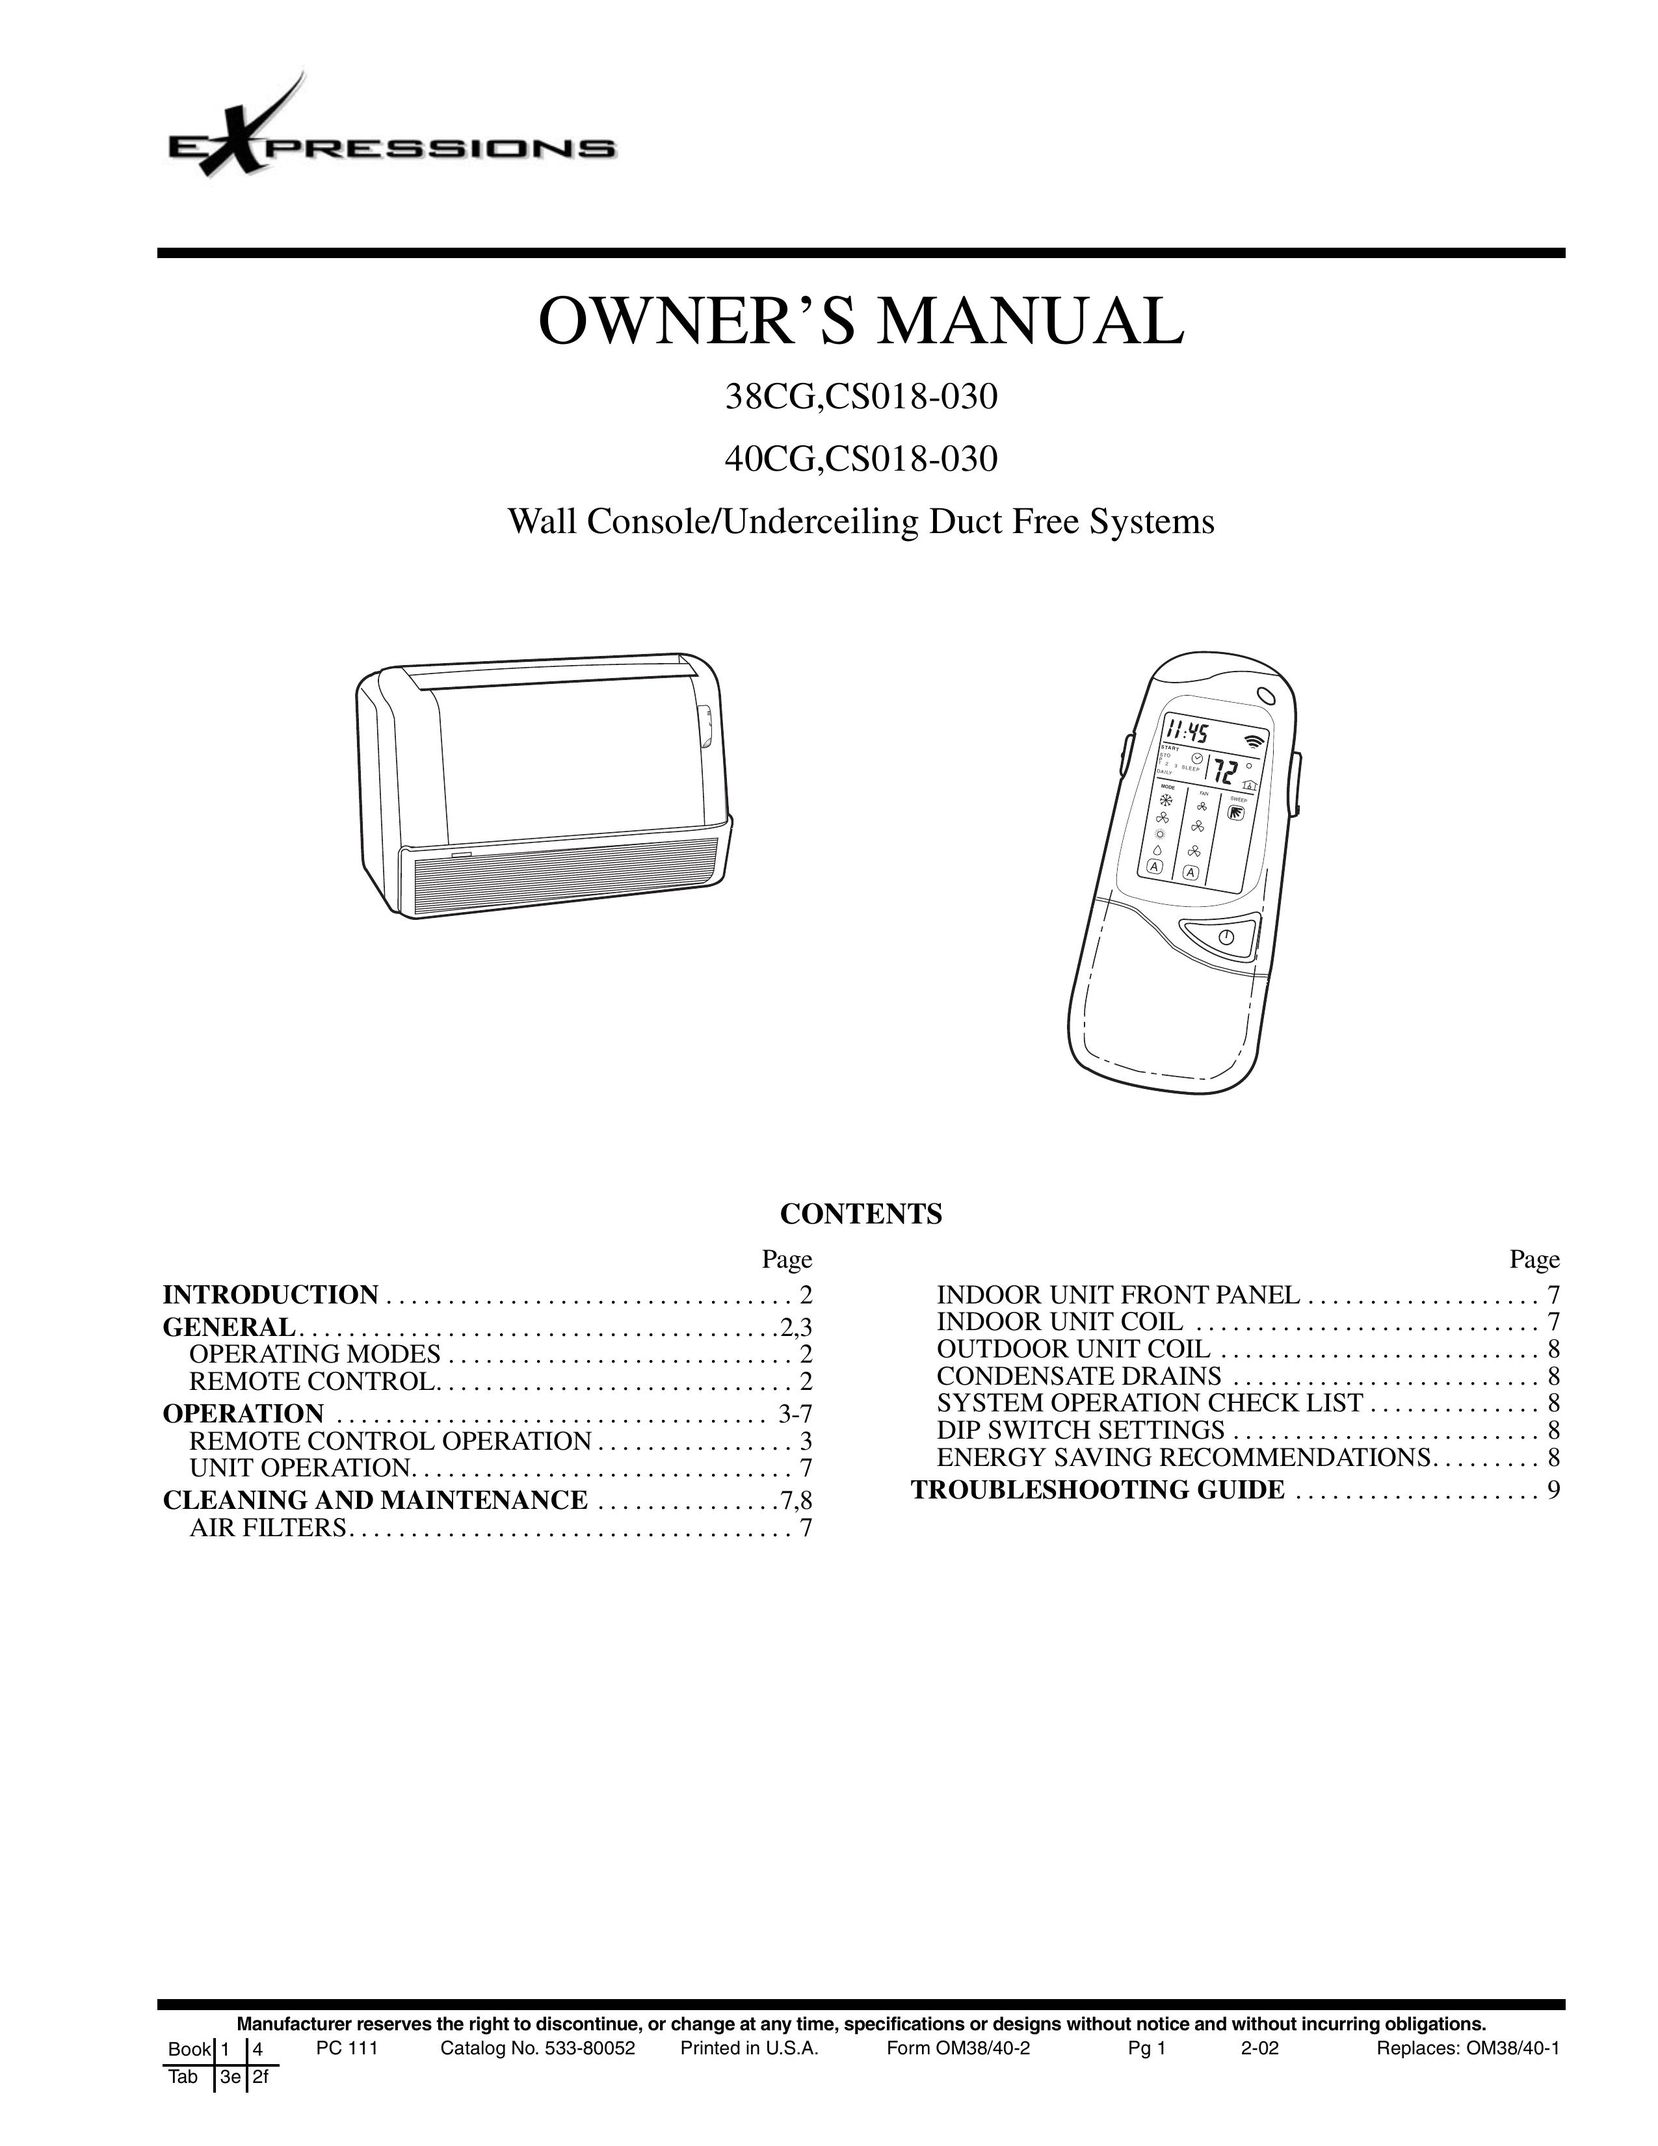 Computer Expressions 40CG Air Conditioner User Manual